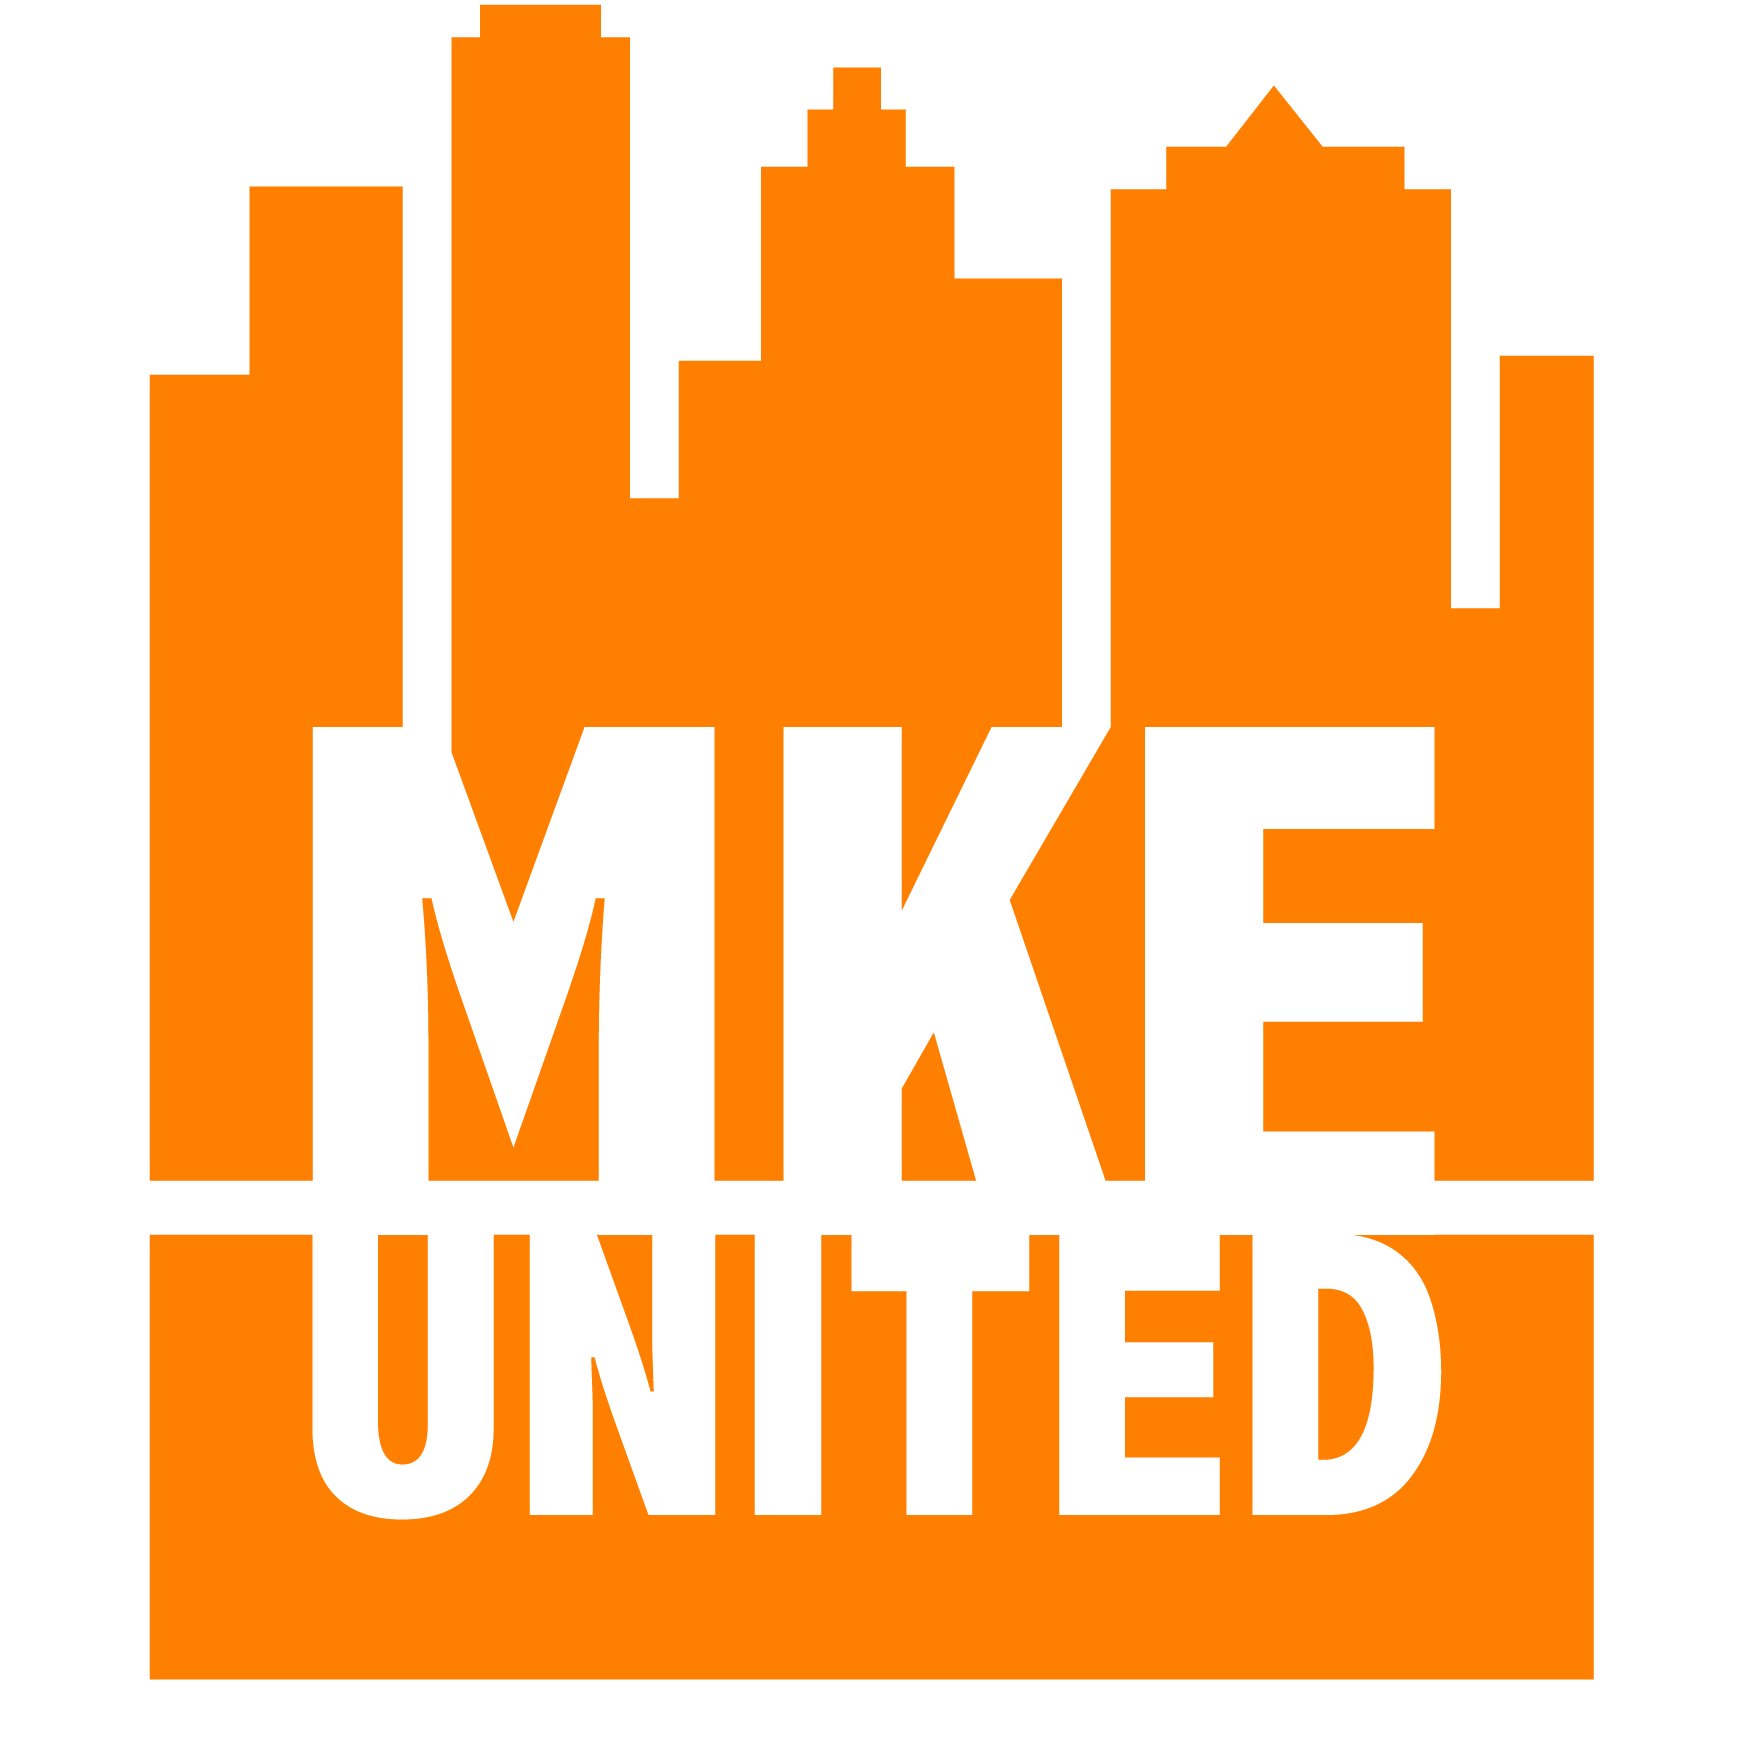 Together we’ve created a shared and inclusive vision for Downtown MKE & its adjacent neighborhoods, supported by a strategic action agenda to make it a reality